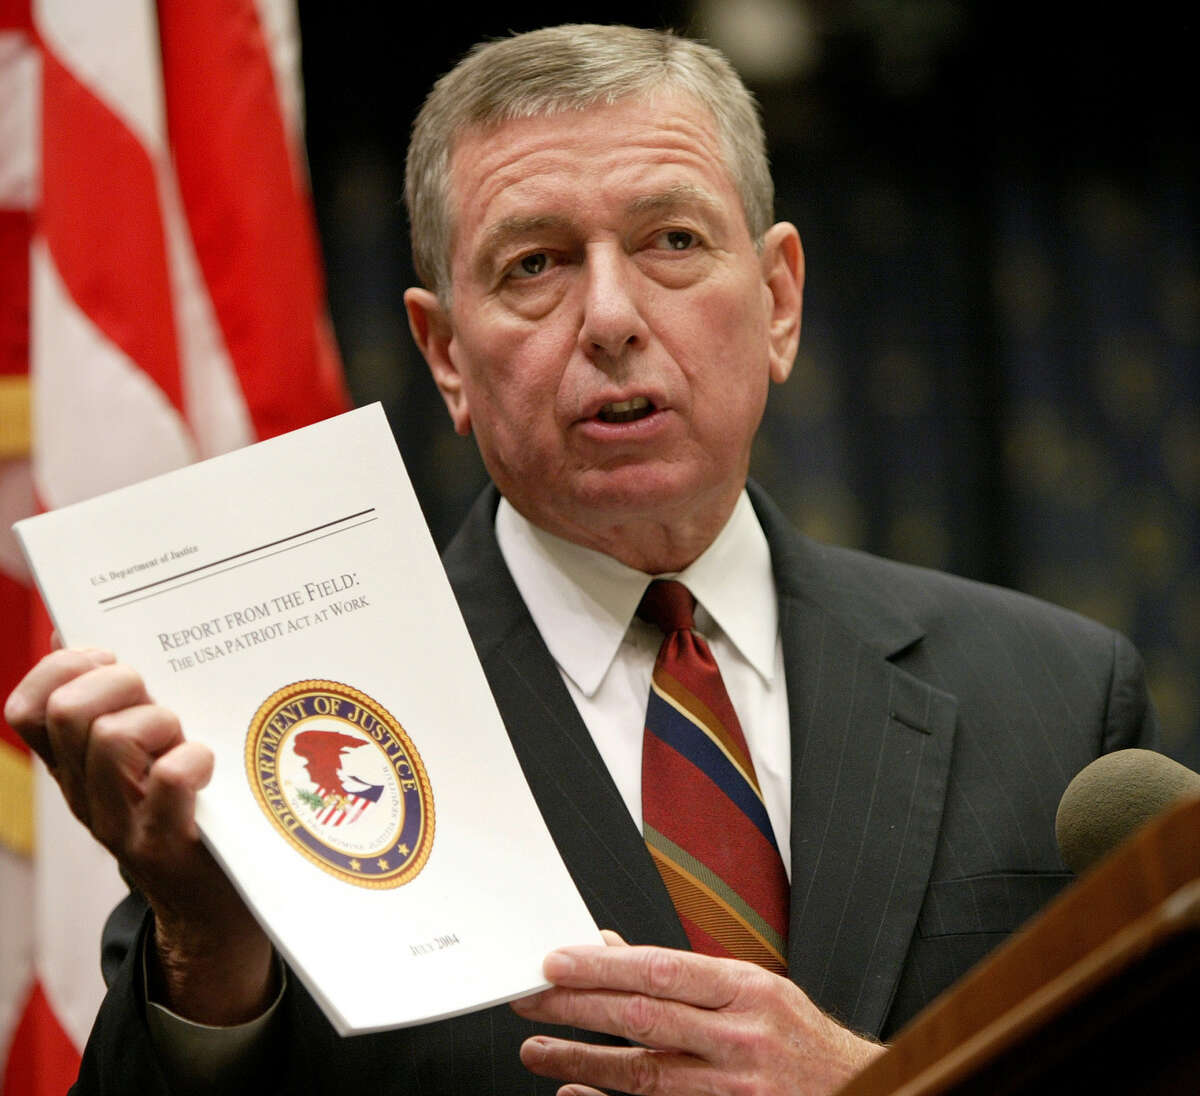 U.S. Attorney General John Ashcroft holds up a copy of "Report from the Field: The USA Patriot Act at Work" during a news conference on July 13, 2004 in Washington. Ashcroft is likely to leave his post before the start of President Bush's second term, senior aides said Thursday Nov. 4, 2004. (AP Photo/Evan Vucci)